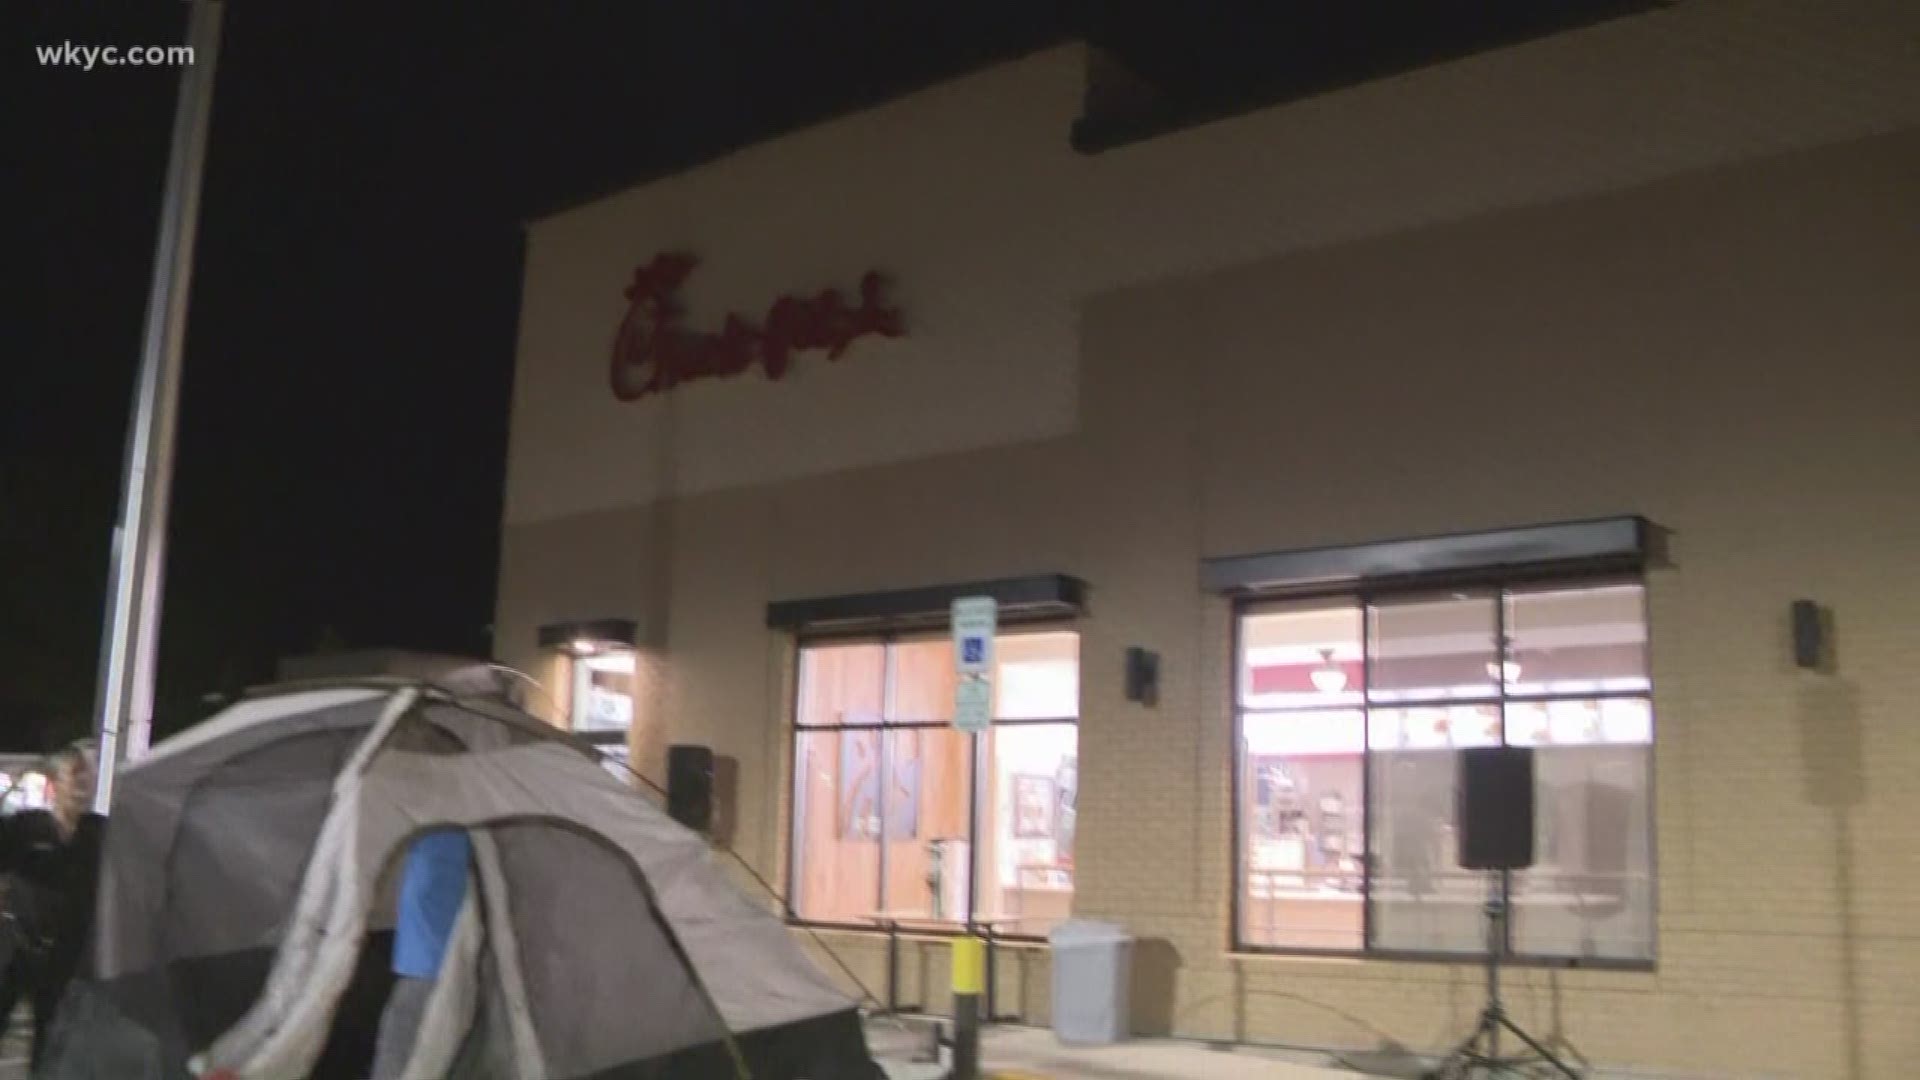 The city of Solon will open its first Chick-fil-A restaurant on Thursday.  But customers were camping out on Wednesday night, bidding to be one of the first 100 people through the door to receive free food for a year.